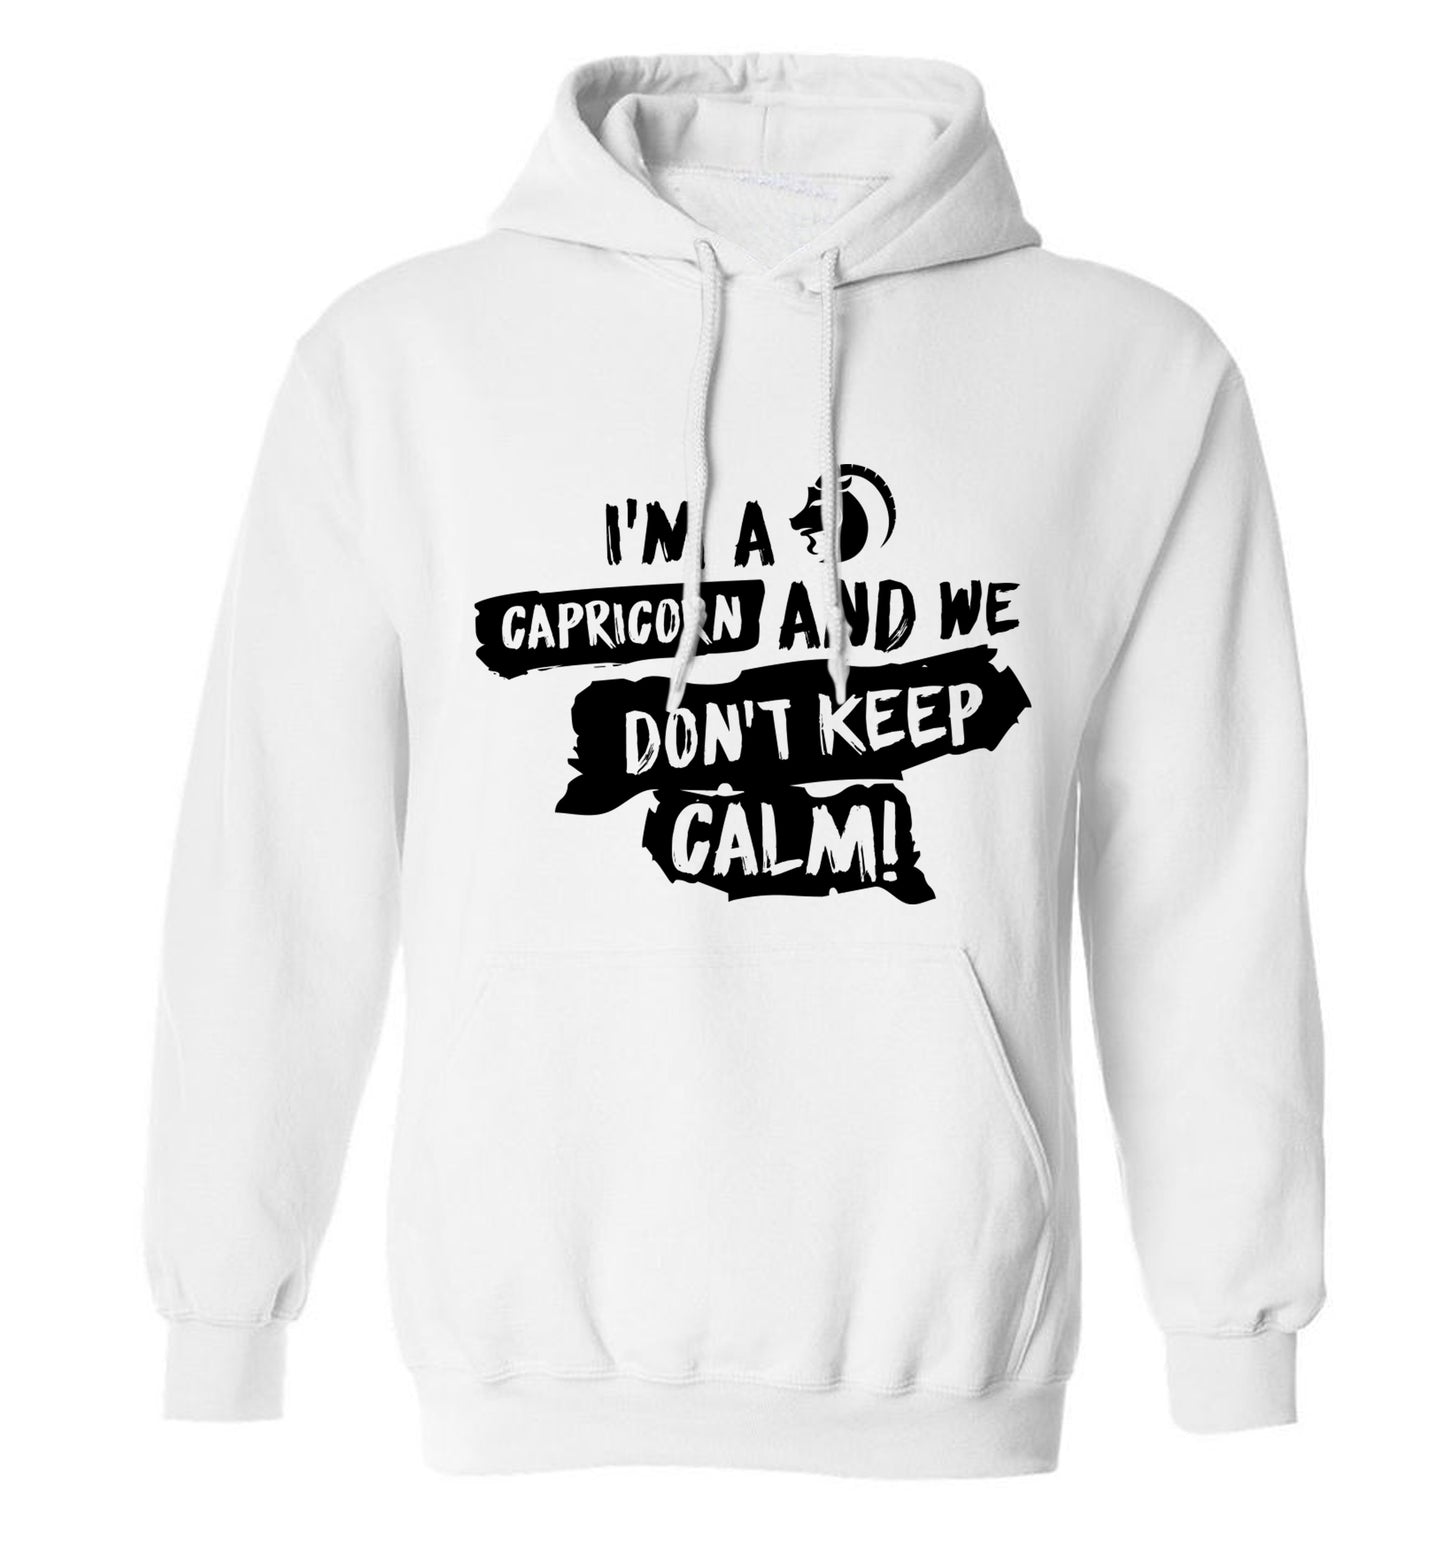 I'm a capricorn and we don't keep calm adults unisex white hoodie 2XL